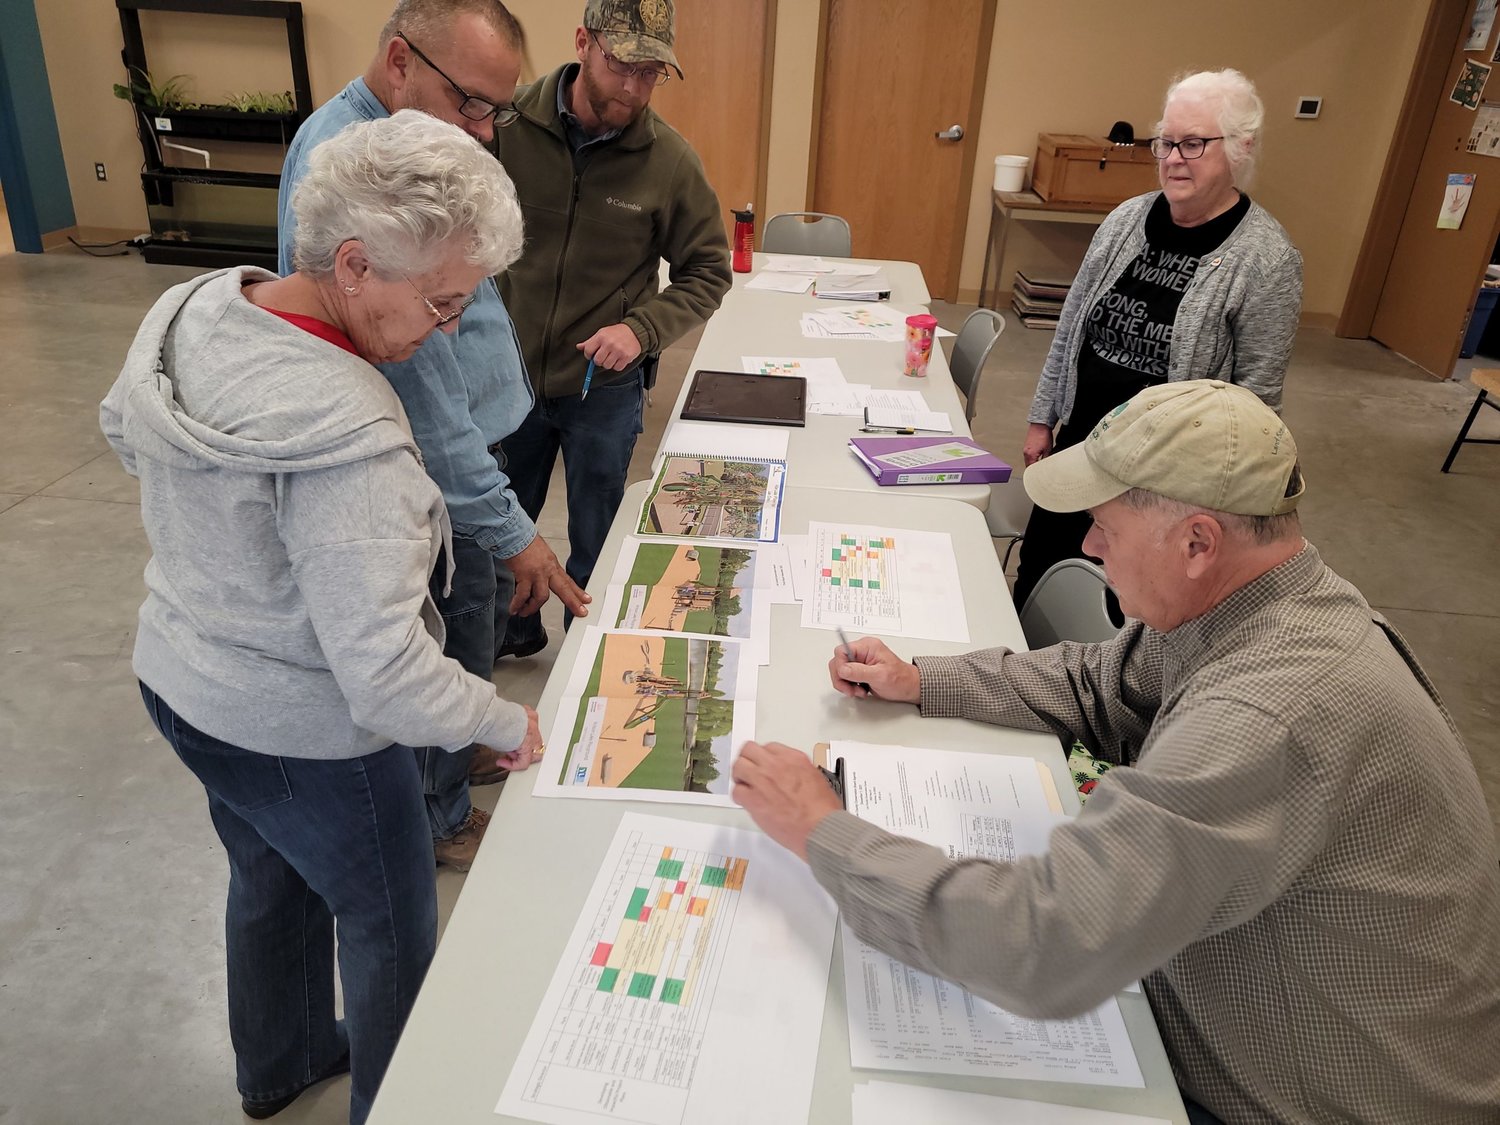 Members of the Lee County Conservation Board look over plans for a new playground layout for Wilson Lake that is set to go up next spring. The playground will cost about $82,000 and will be paid for out of the Conservation Board’s trust fund which is replenished with park revenue.